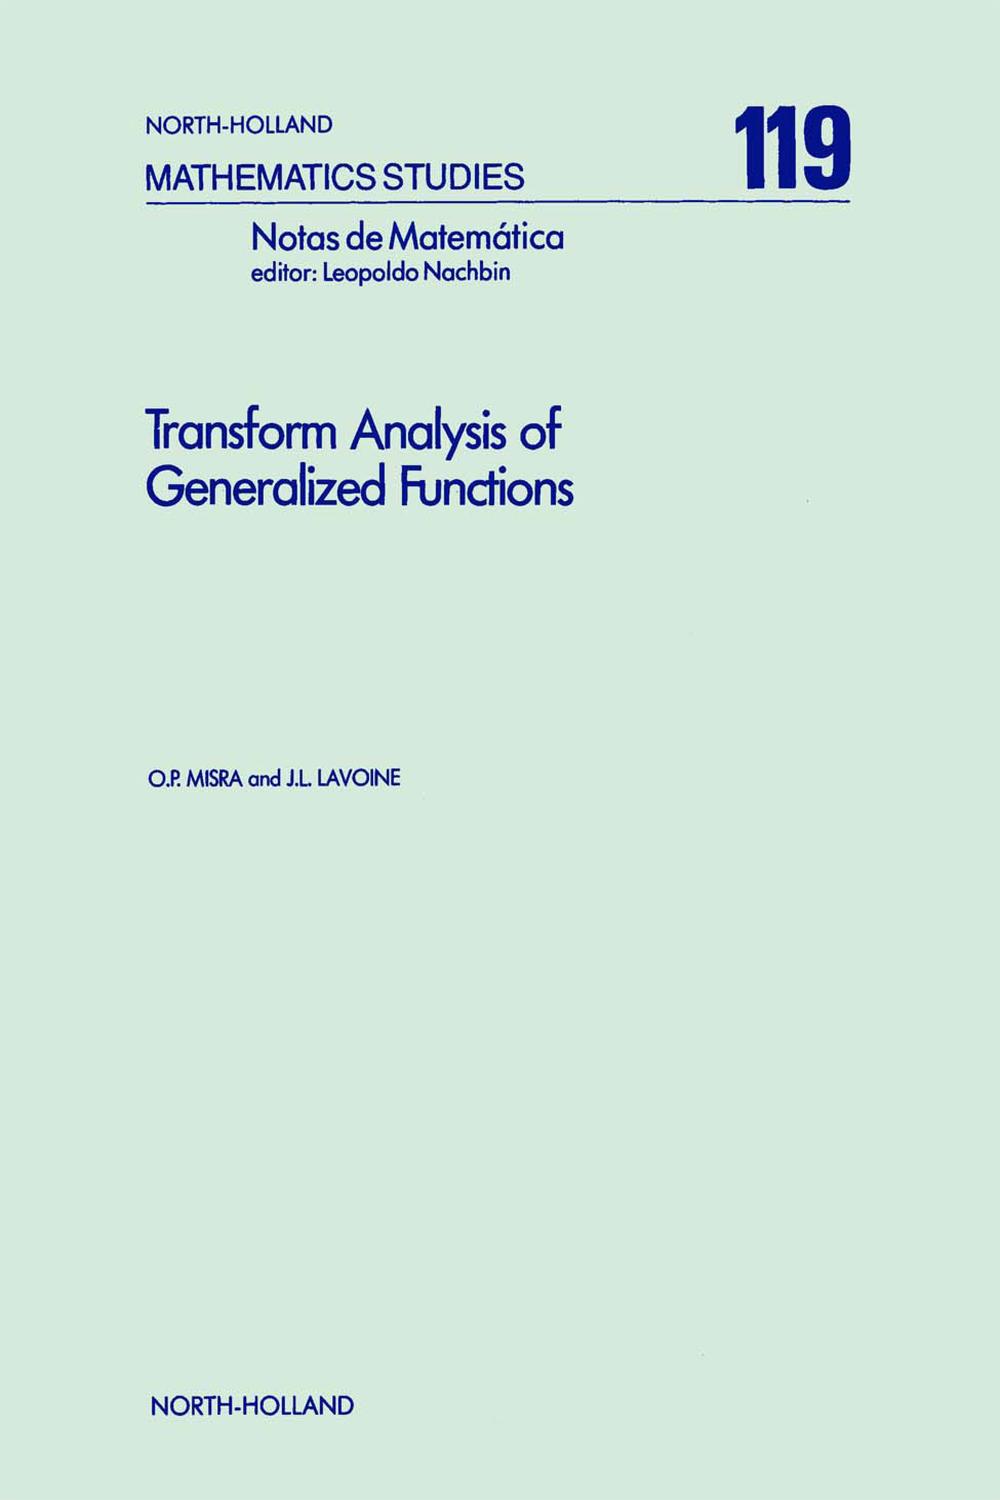 Transform Analysis of Generalized Functions - O.P. Misra, J.L. Lavoine